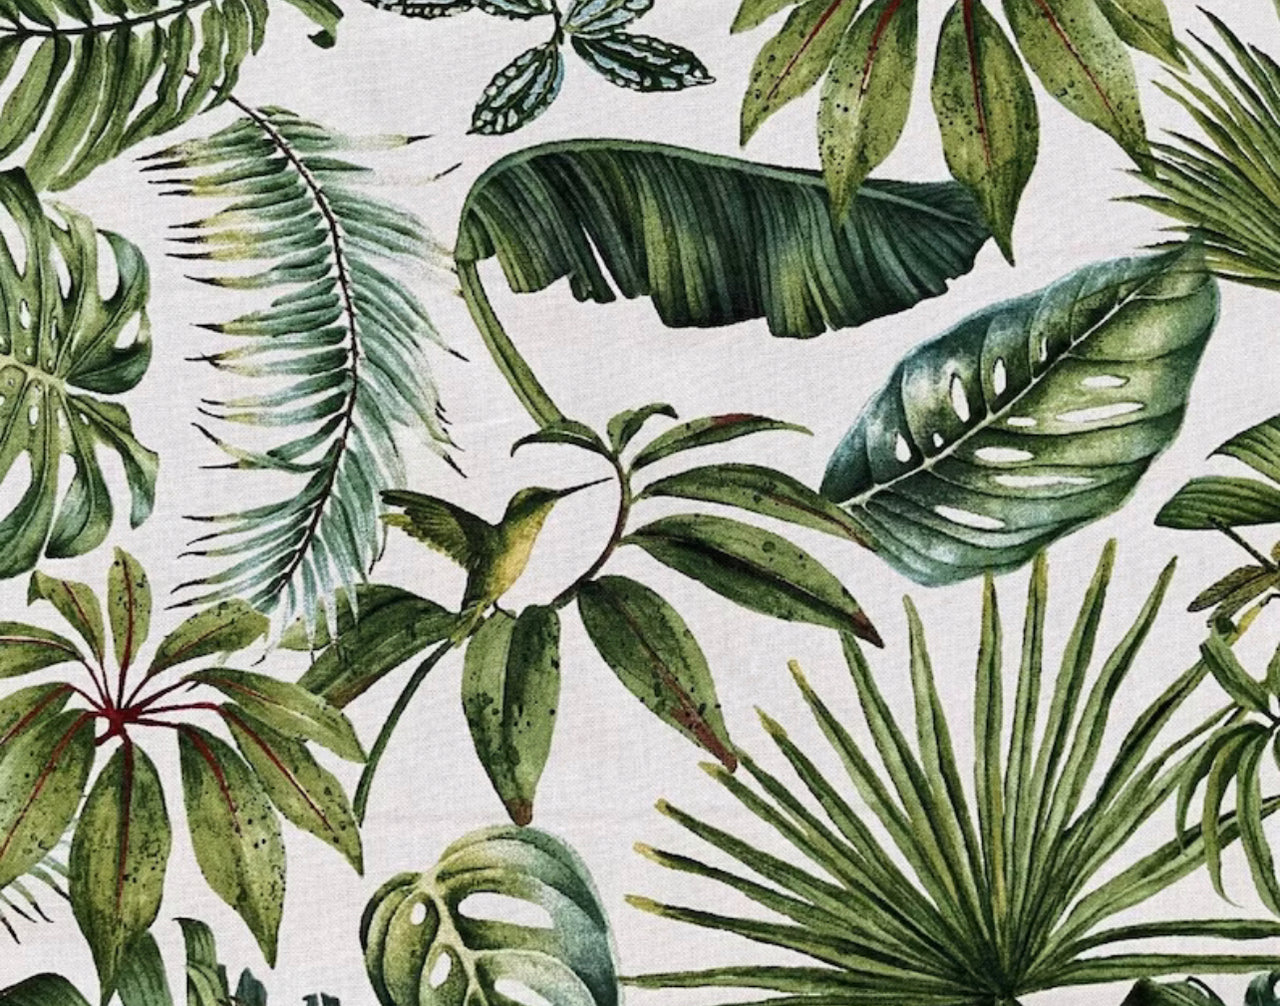 Tropical Garden Cotton Fabric / Botanical Leaves Pattern with Frog, Hummingbird, Dragonfly, Insect Accents